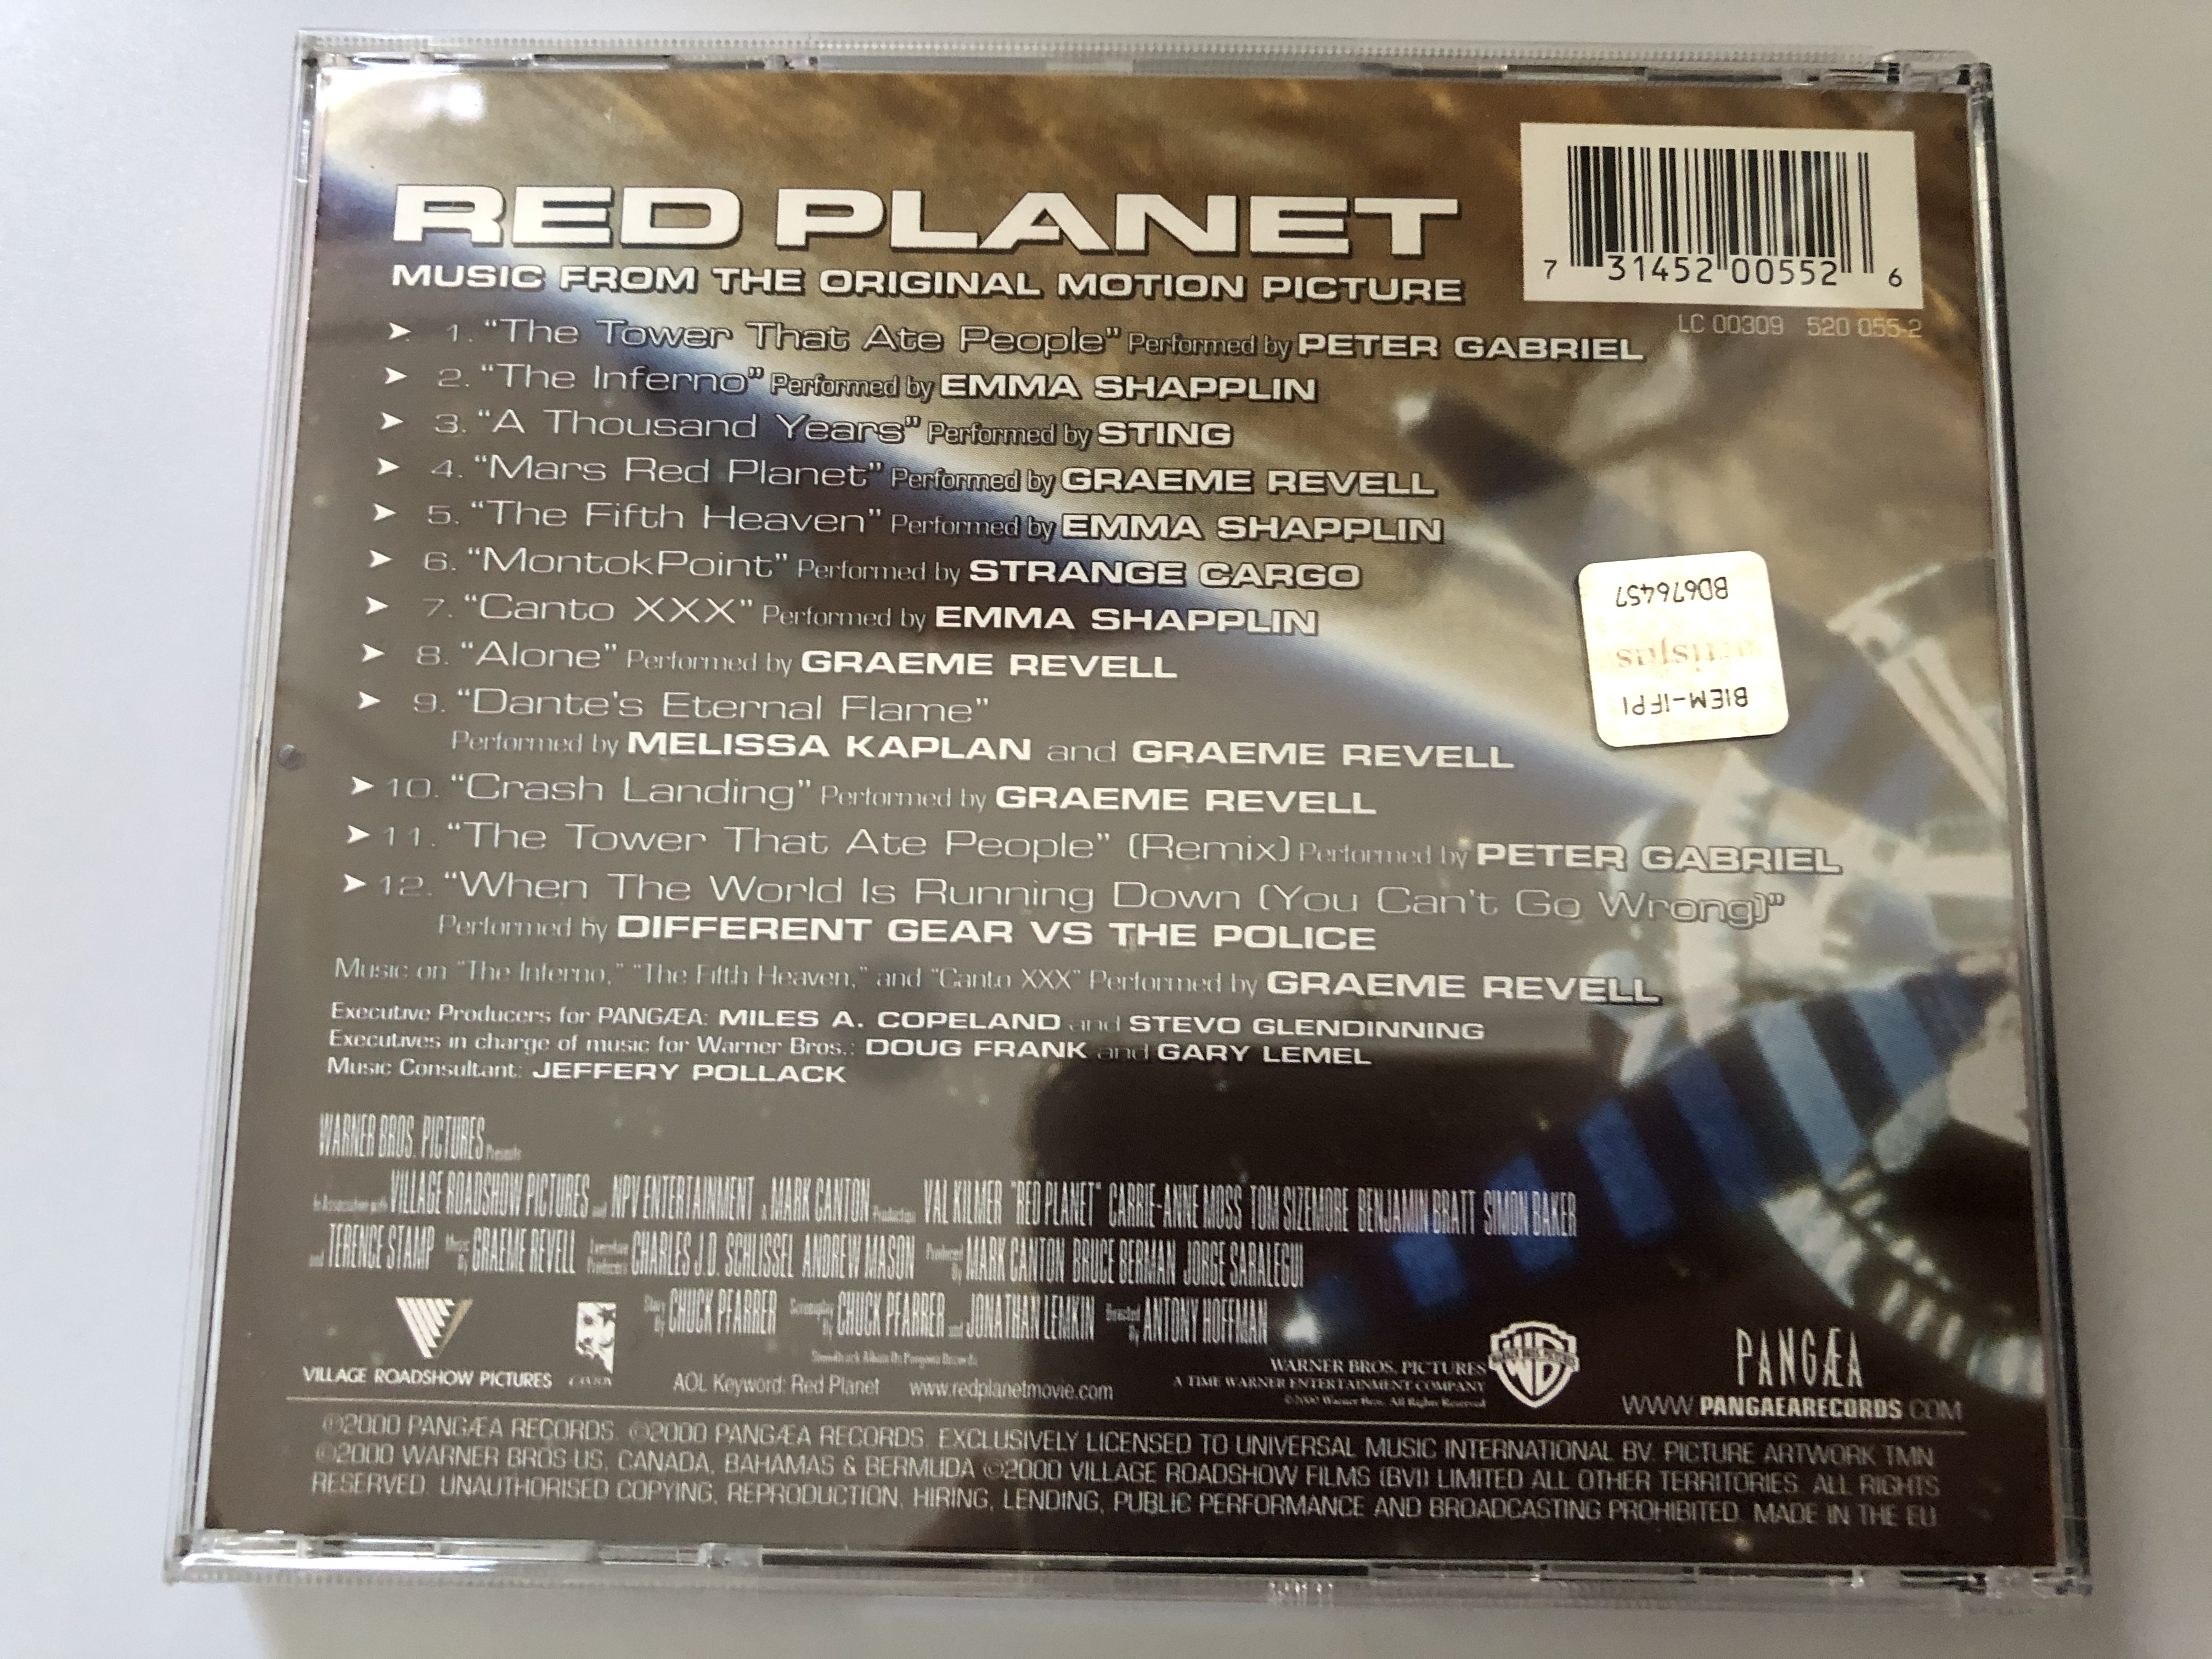 red-planet-music-from-the-original-motion-picture-music-by-graeme-revell-not-a-sound-not-a-warning-not-a-chance-not-alone.-pang-a-audio-cd-2000-520-055-2-5-.jpg